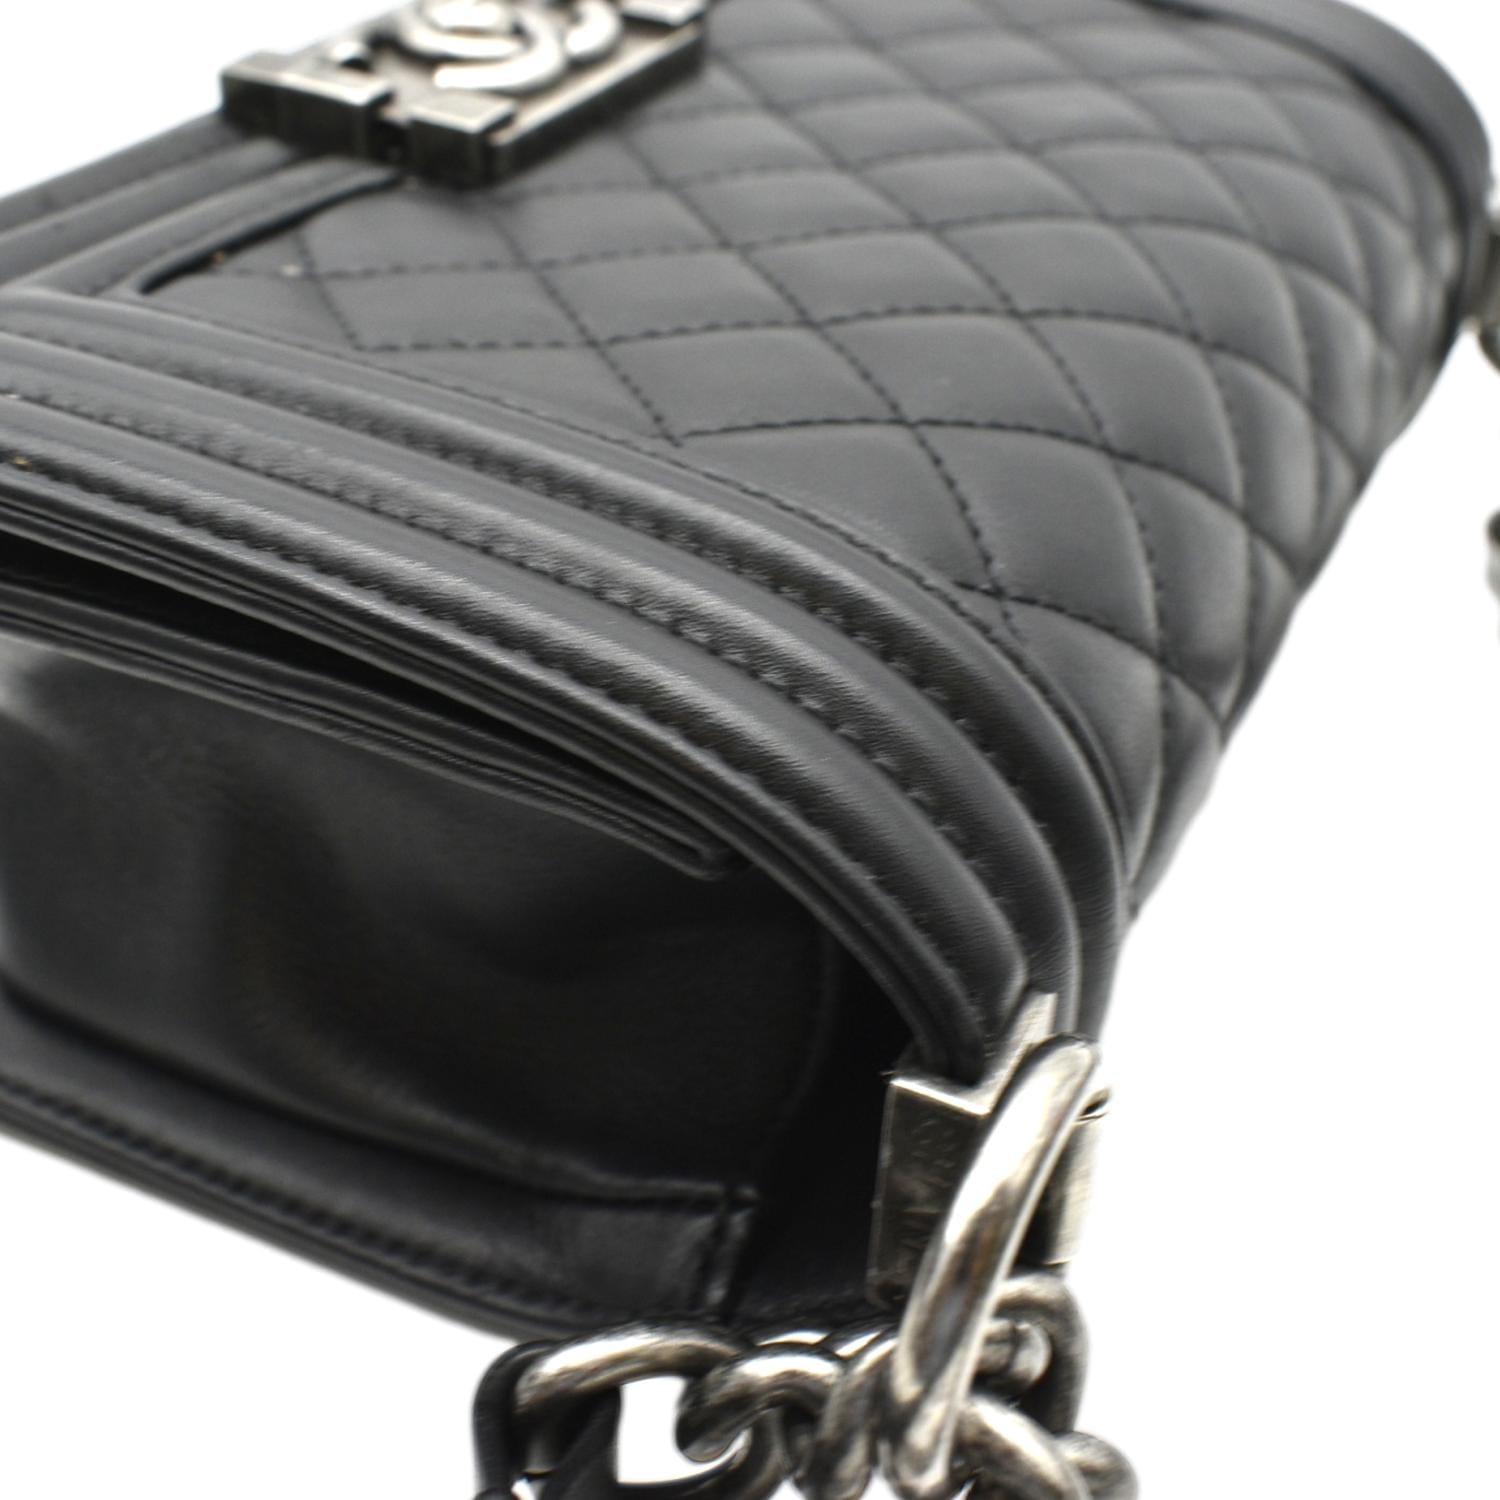 Chanel So Black Lambskin Quilted Small Boy Flap Bag